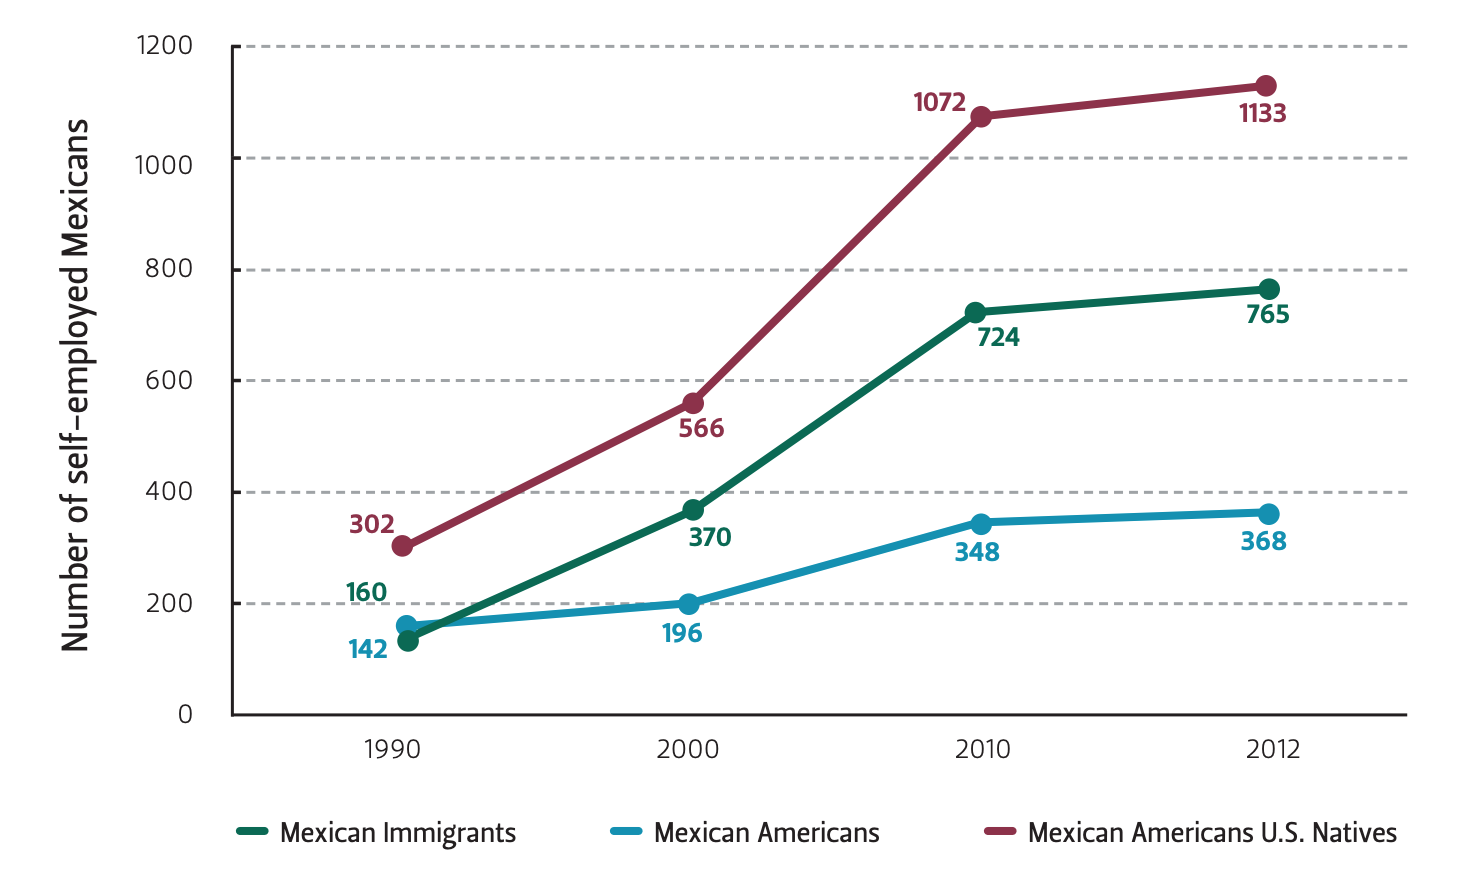 Self-Employed Mexicans and Mexican Americans in the United States